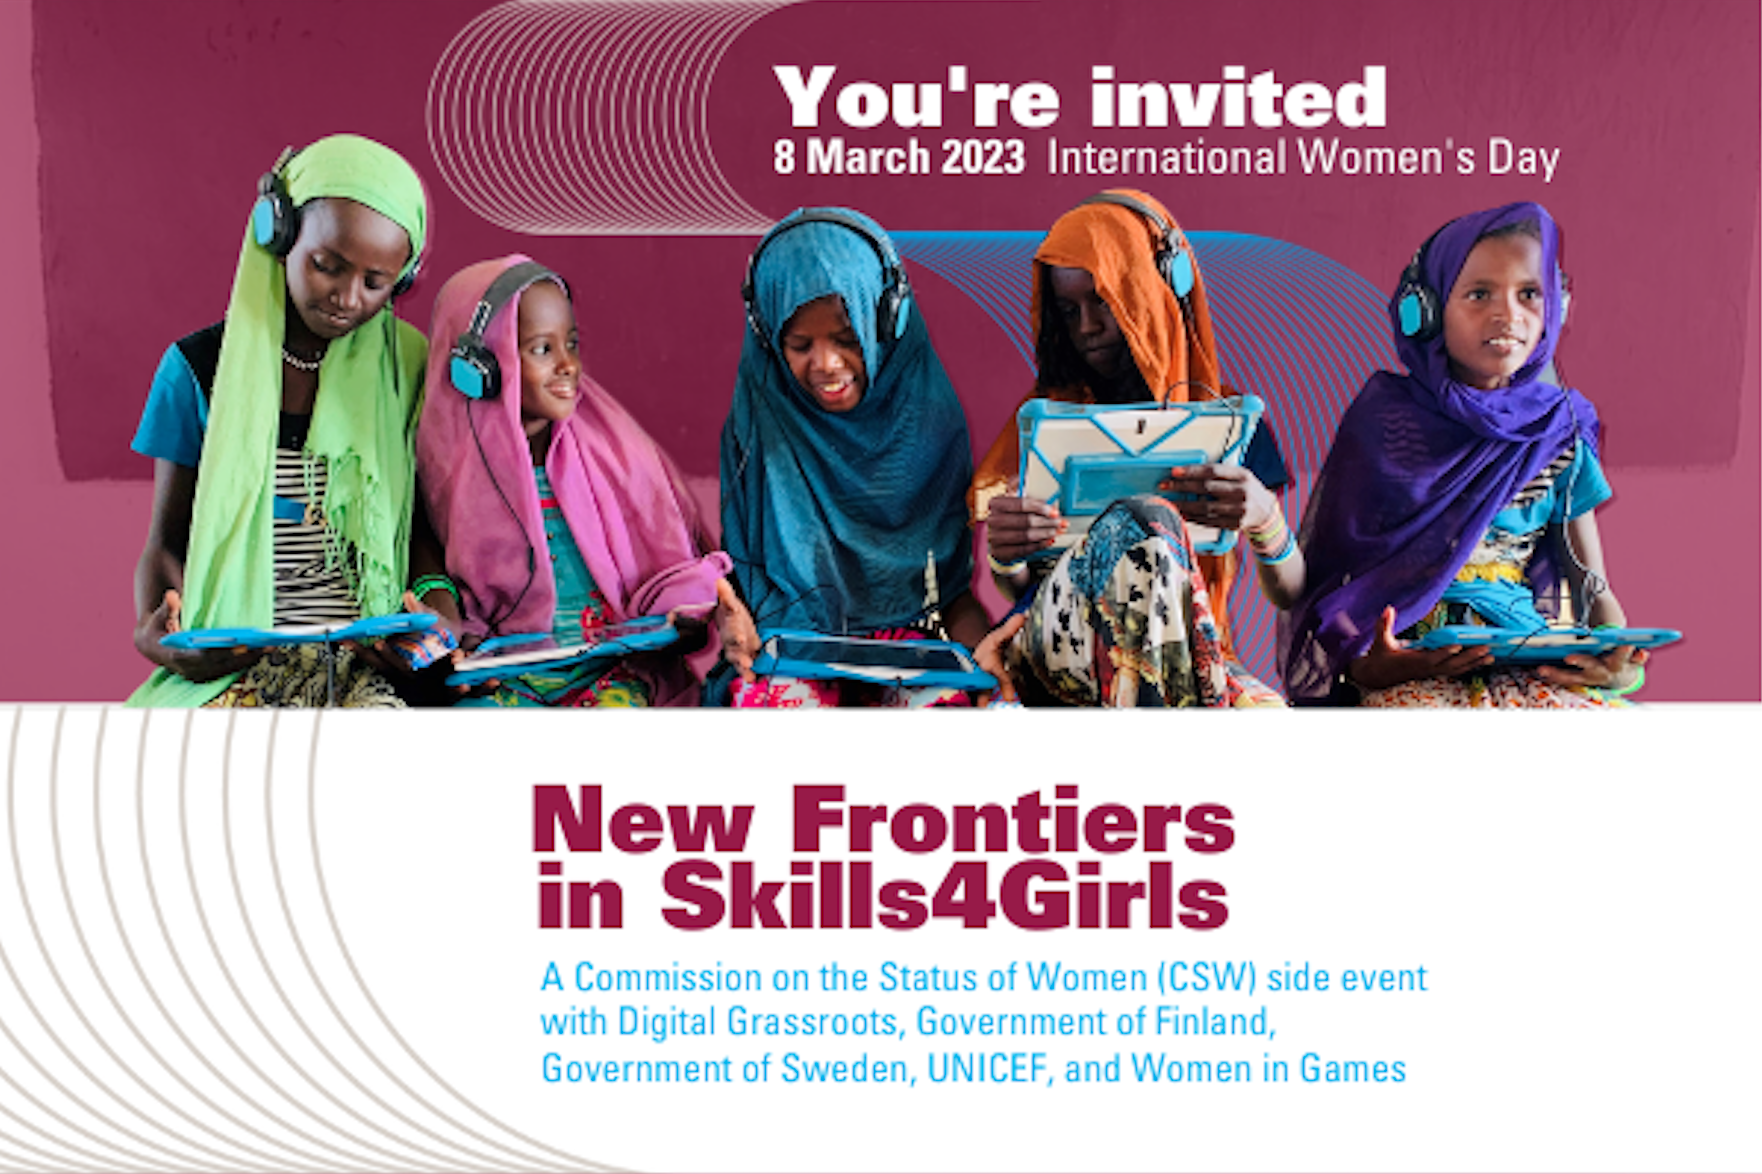 New frontiers in skills for girls event invite